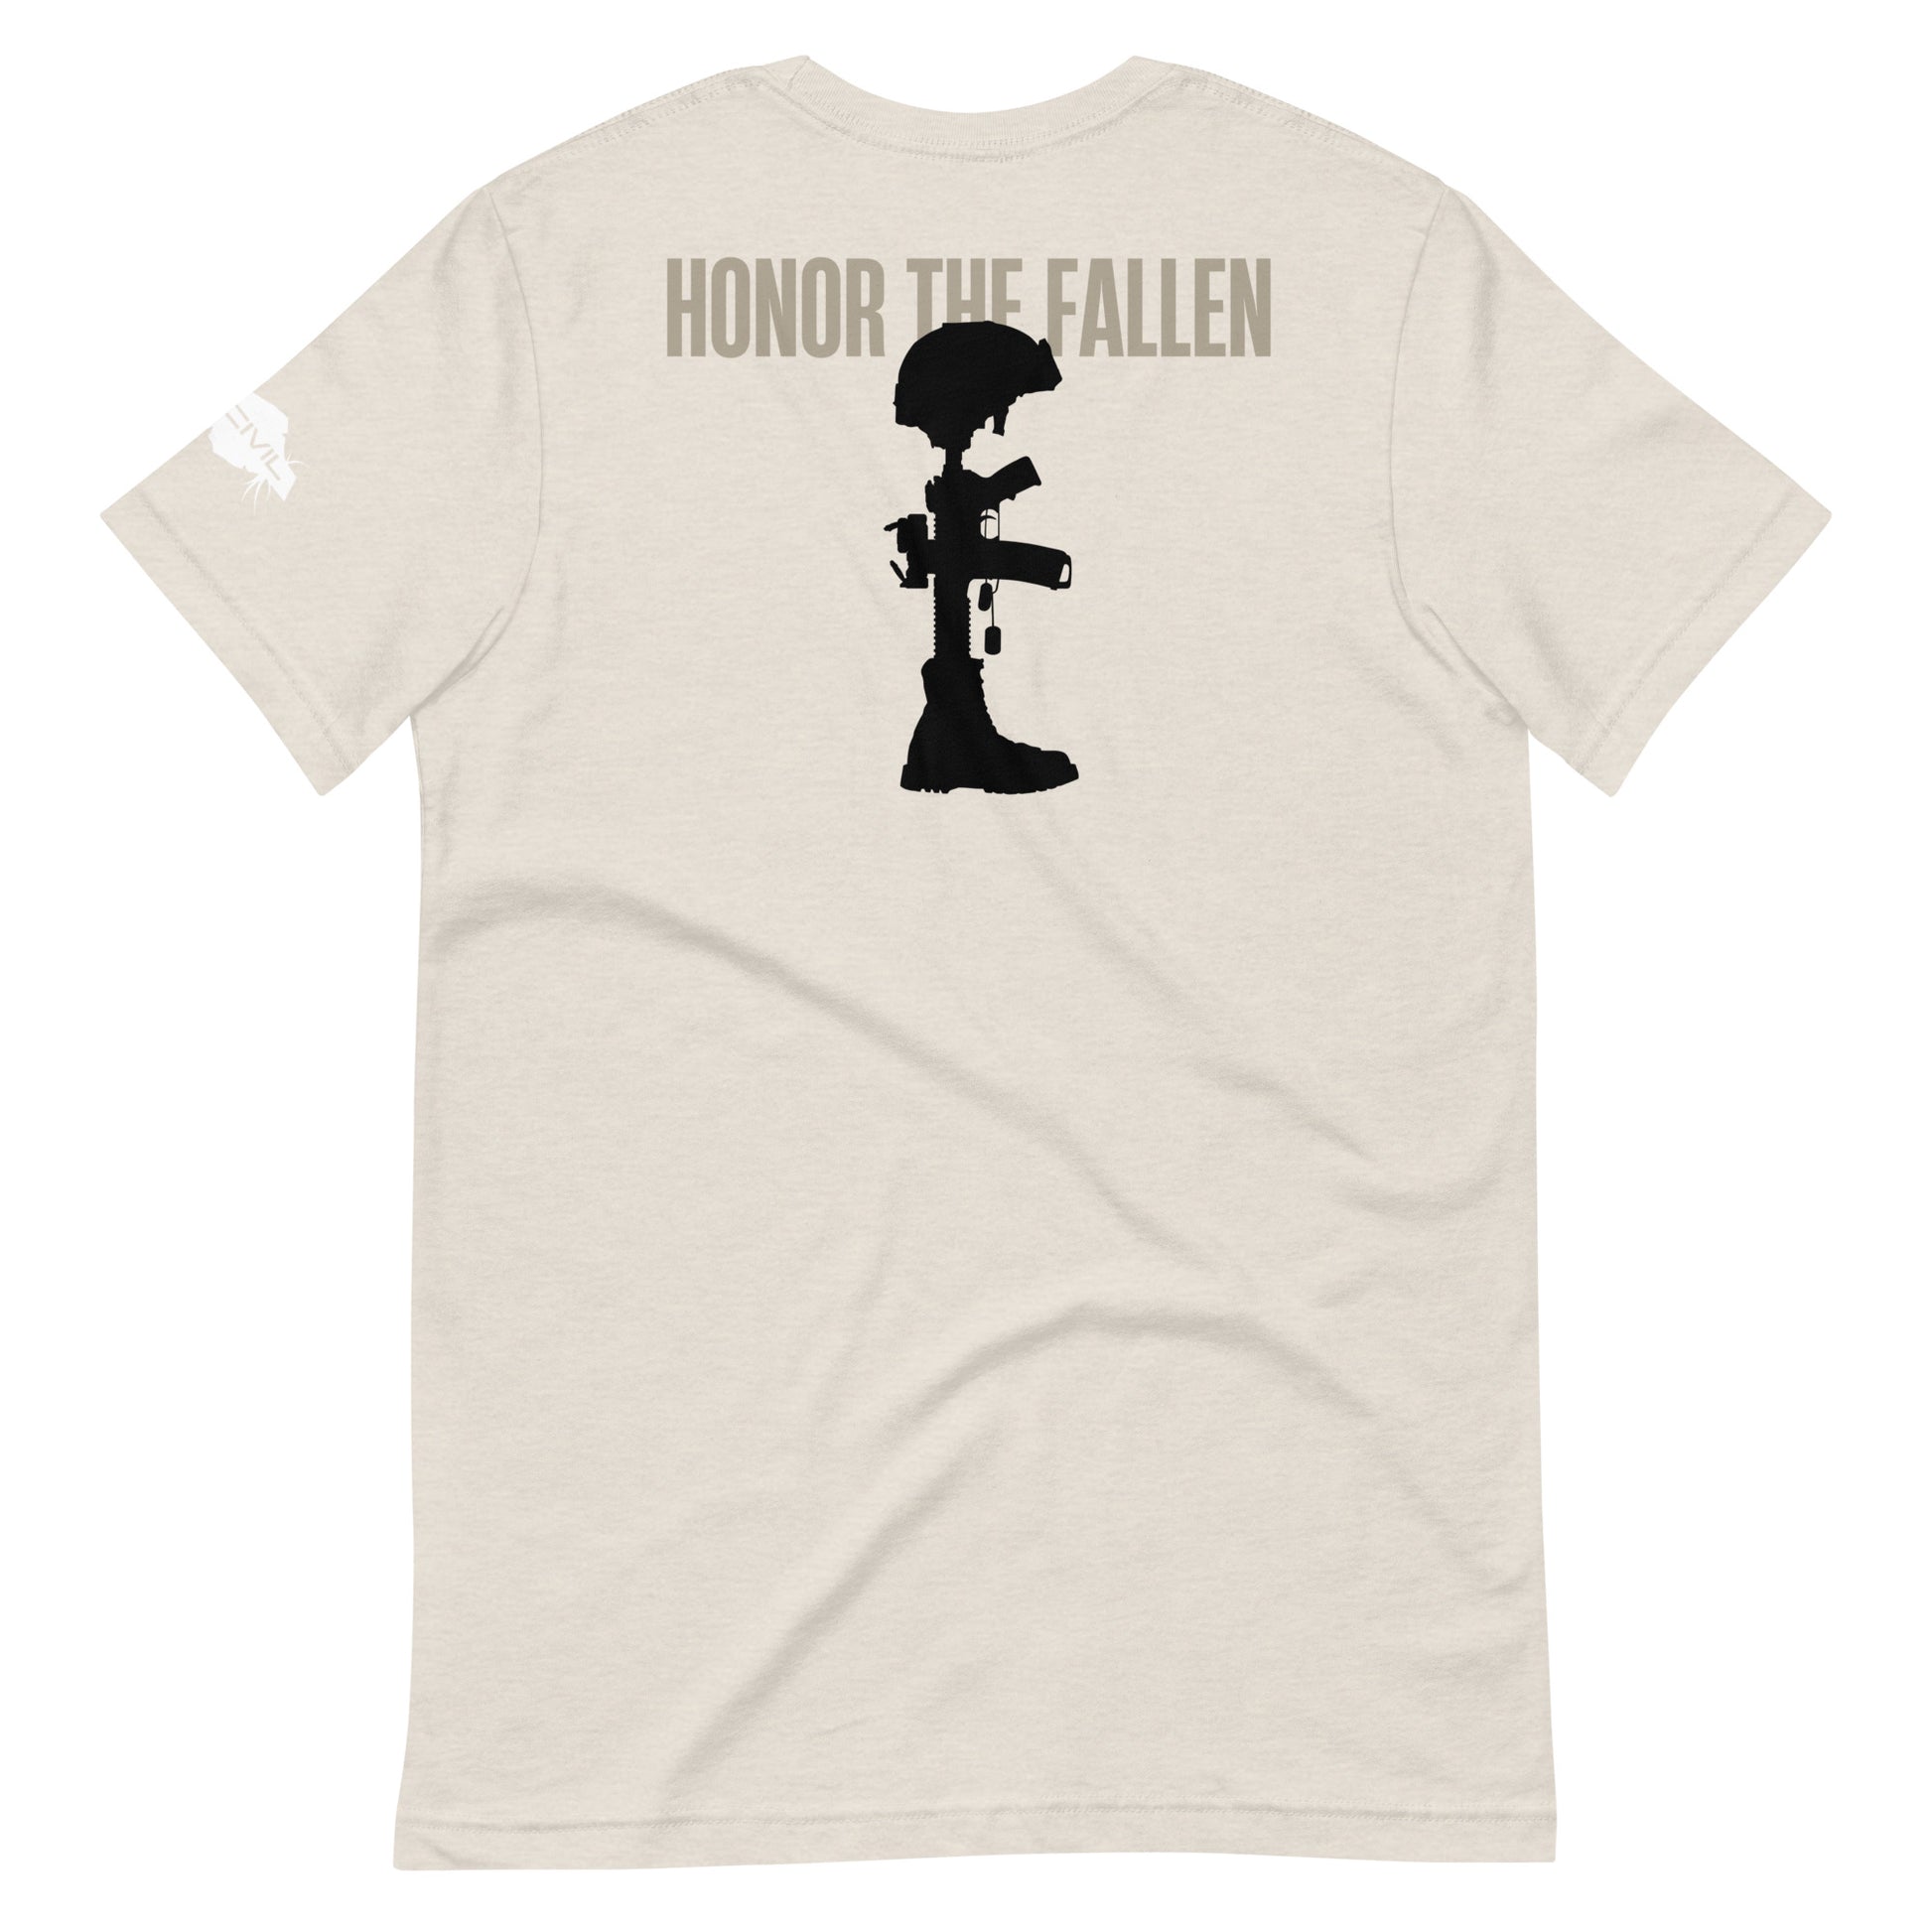 Honor the Fallen T-shirt, a powerful tribute to those who sacrificed for our freedom. Designed for Memorial Day, Heather Dust Unisex.